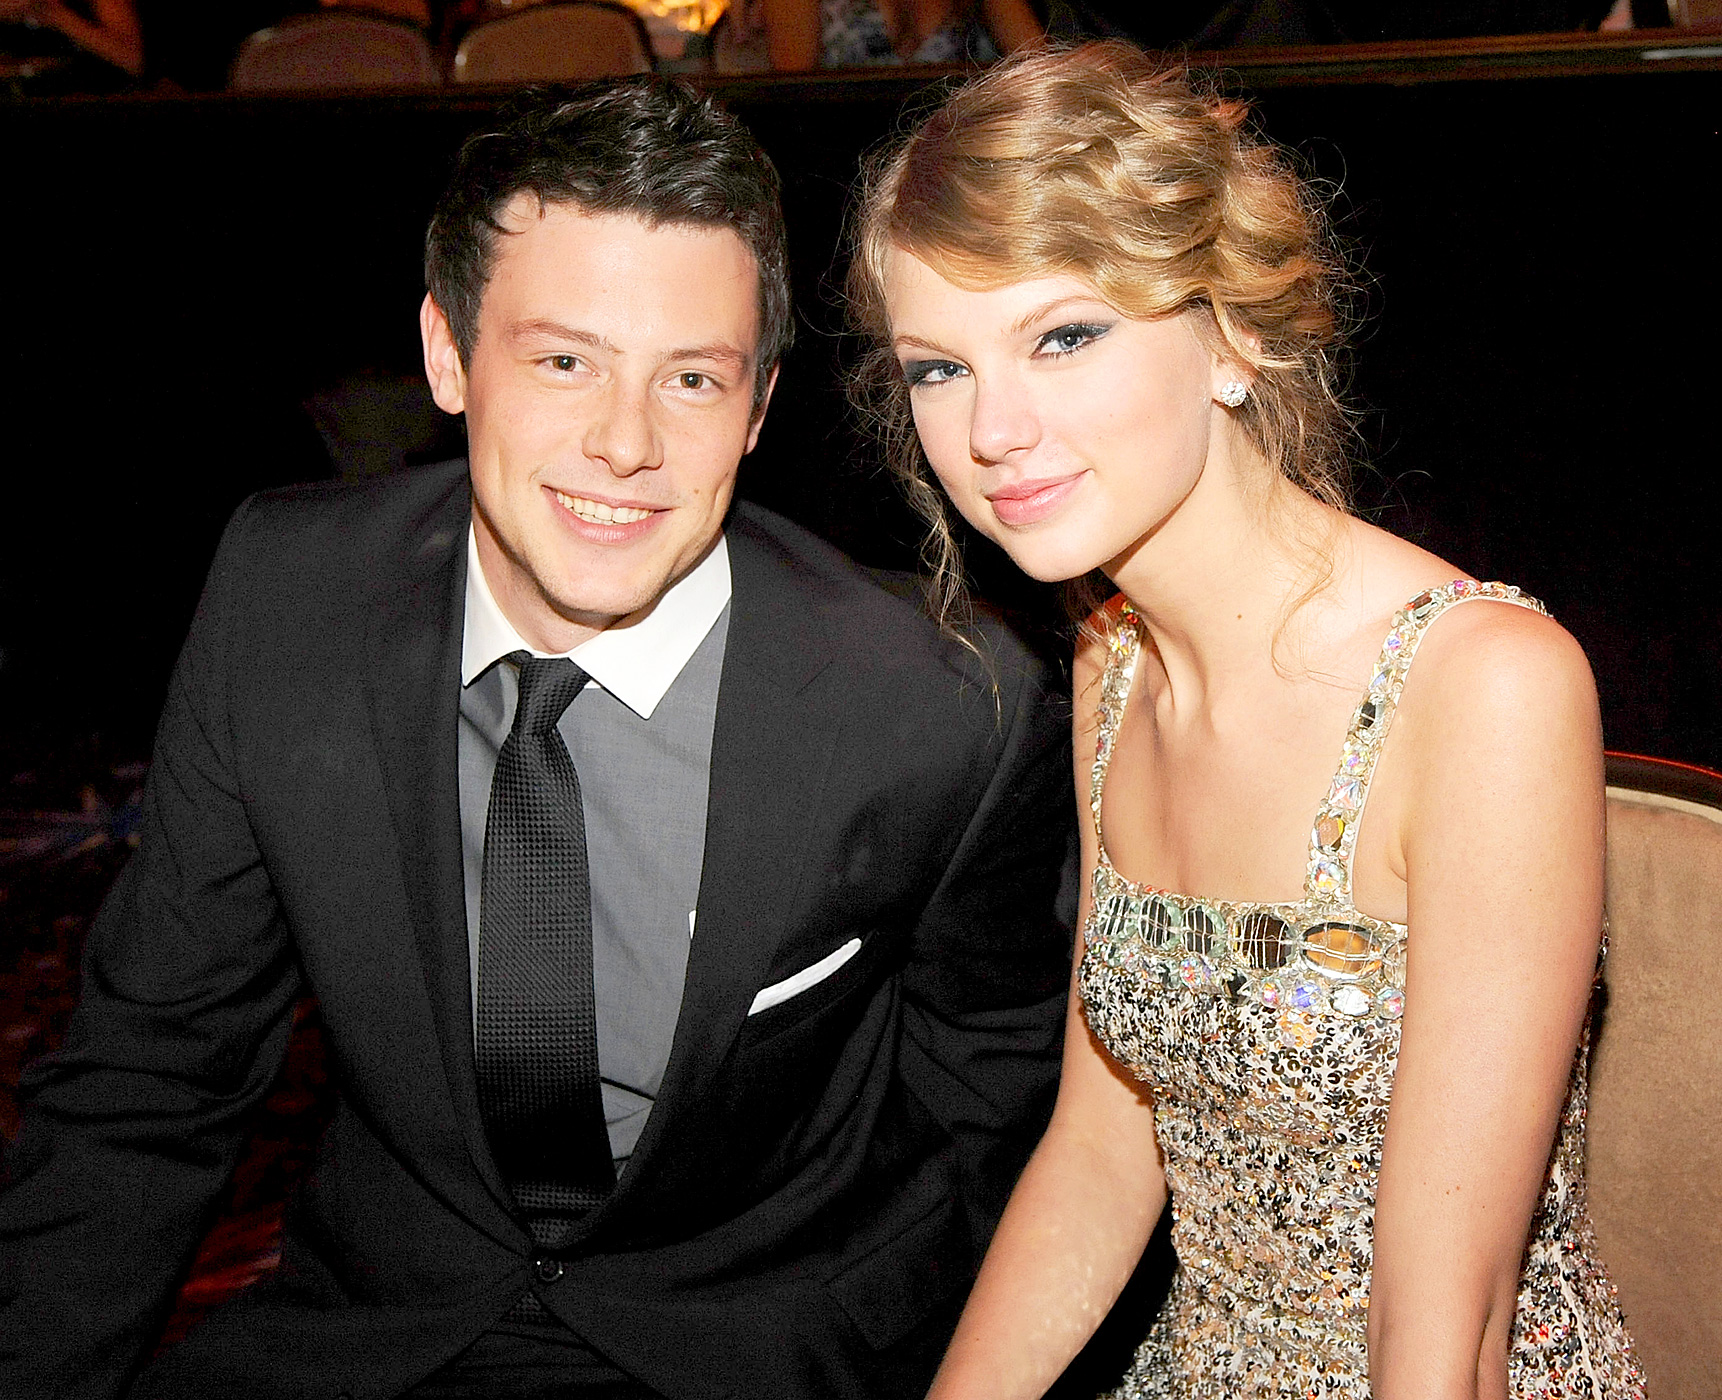 Taylor Swift's dating history: A timeline of her famous